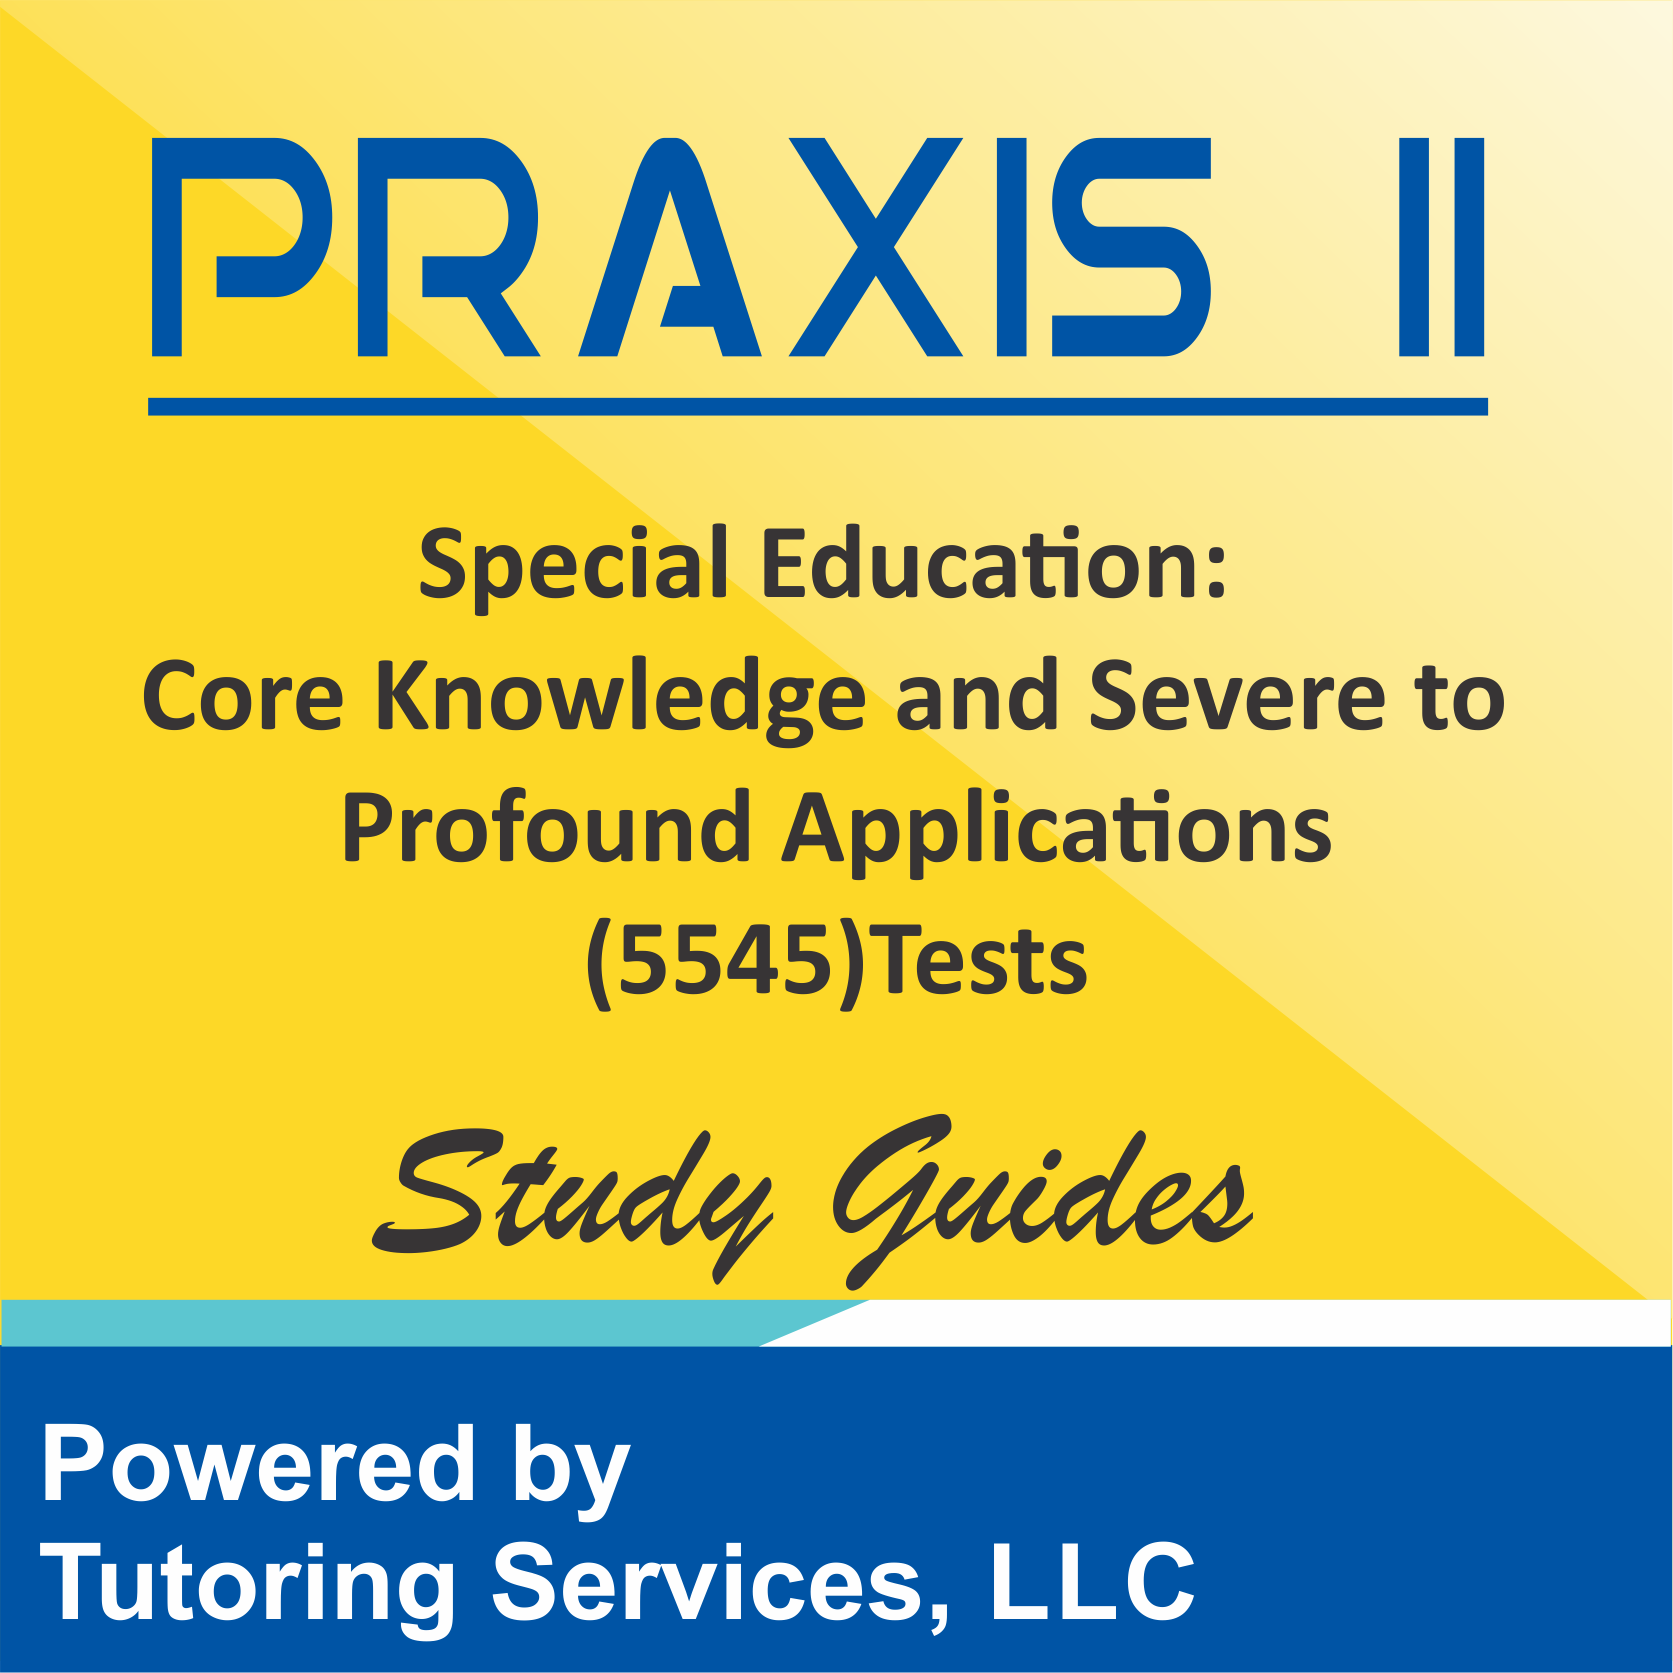 Praxis II Special Education: Core Knowledge and Applications (5354) Test